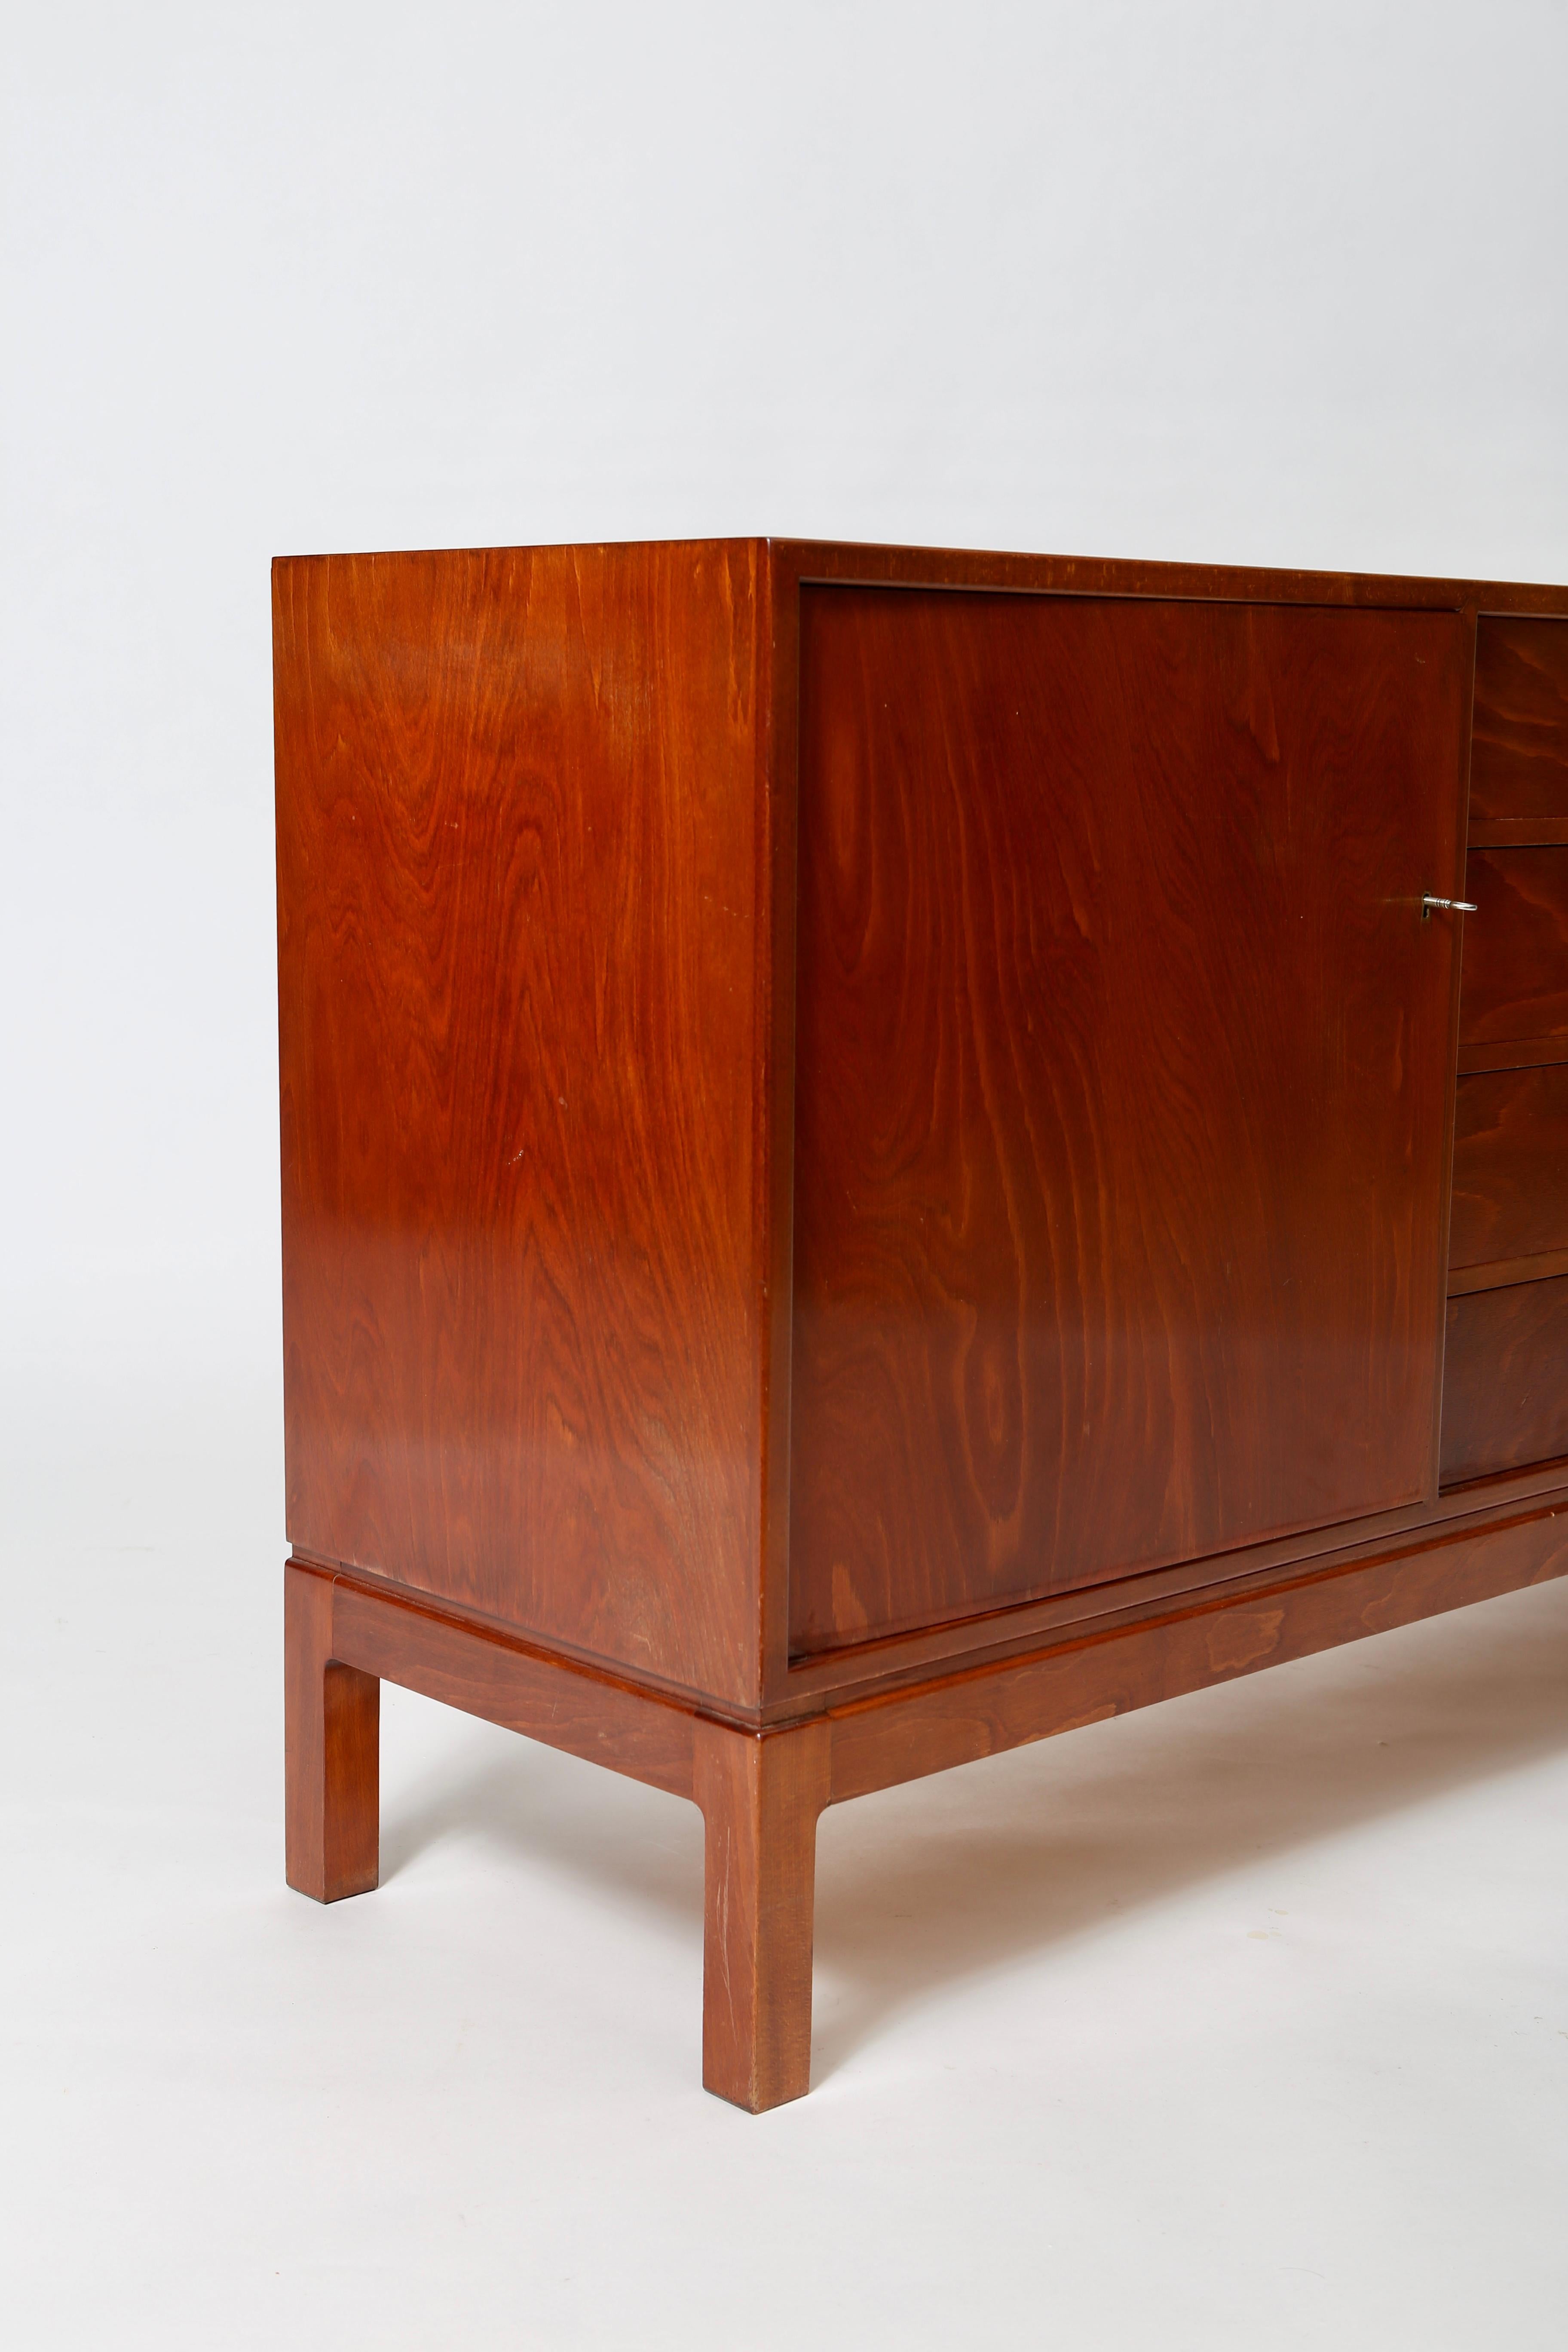 Stained Danish Art Deco 1930s Sideboard by Fritz Hansen